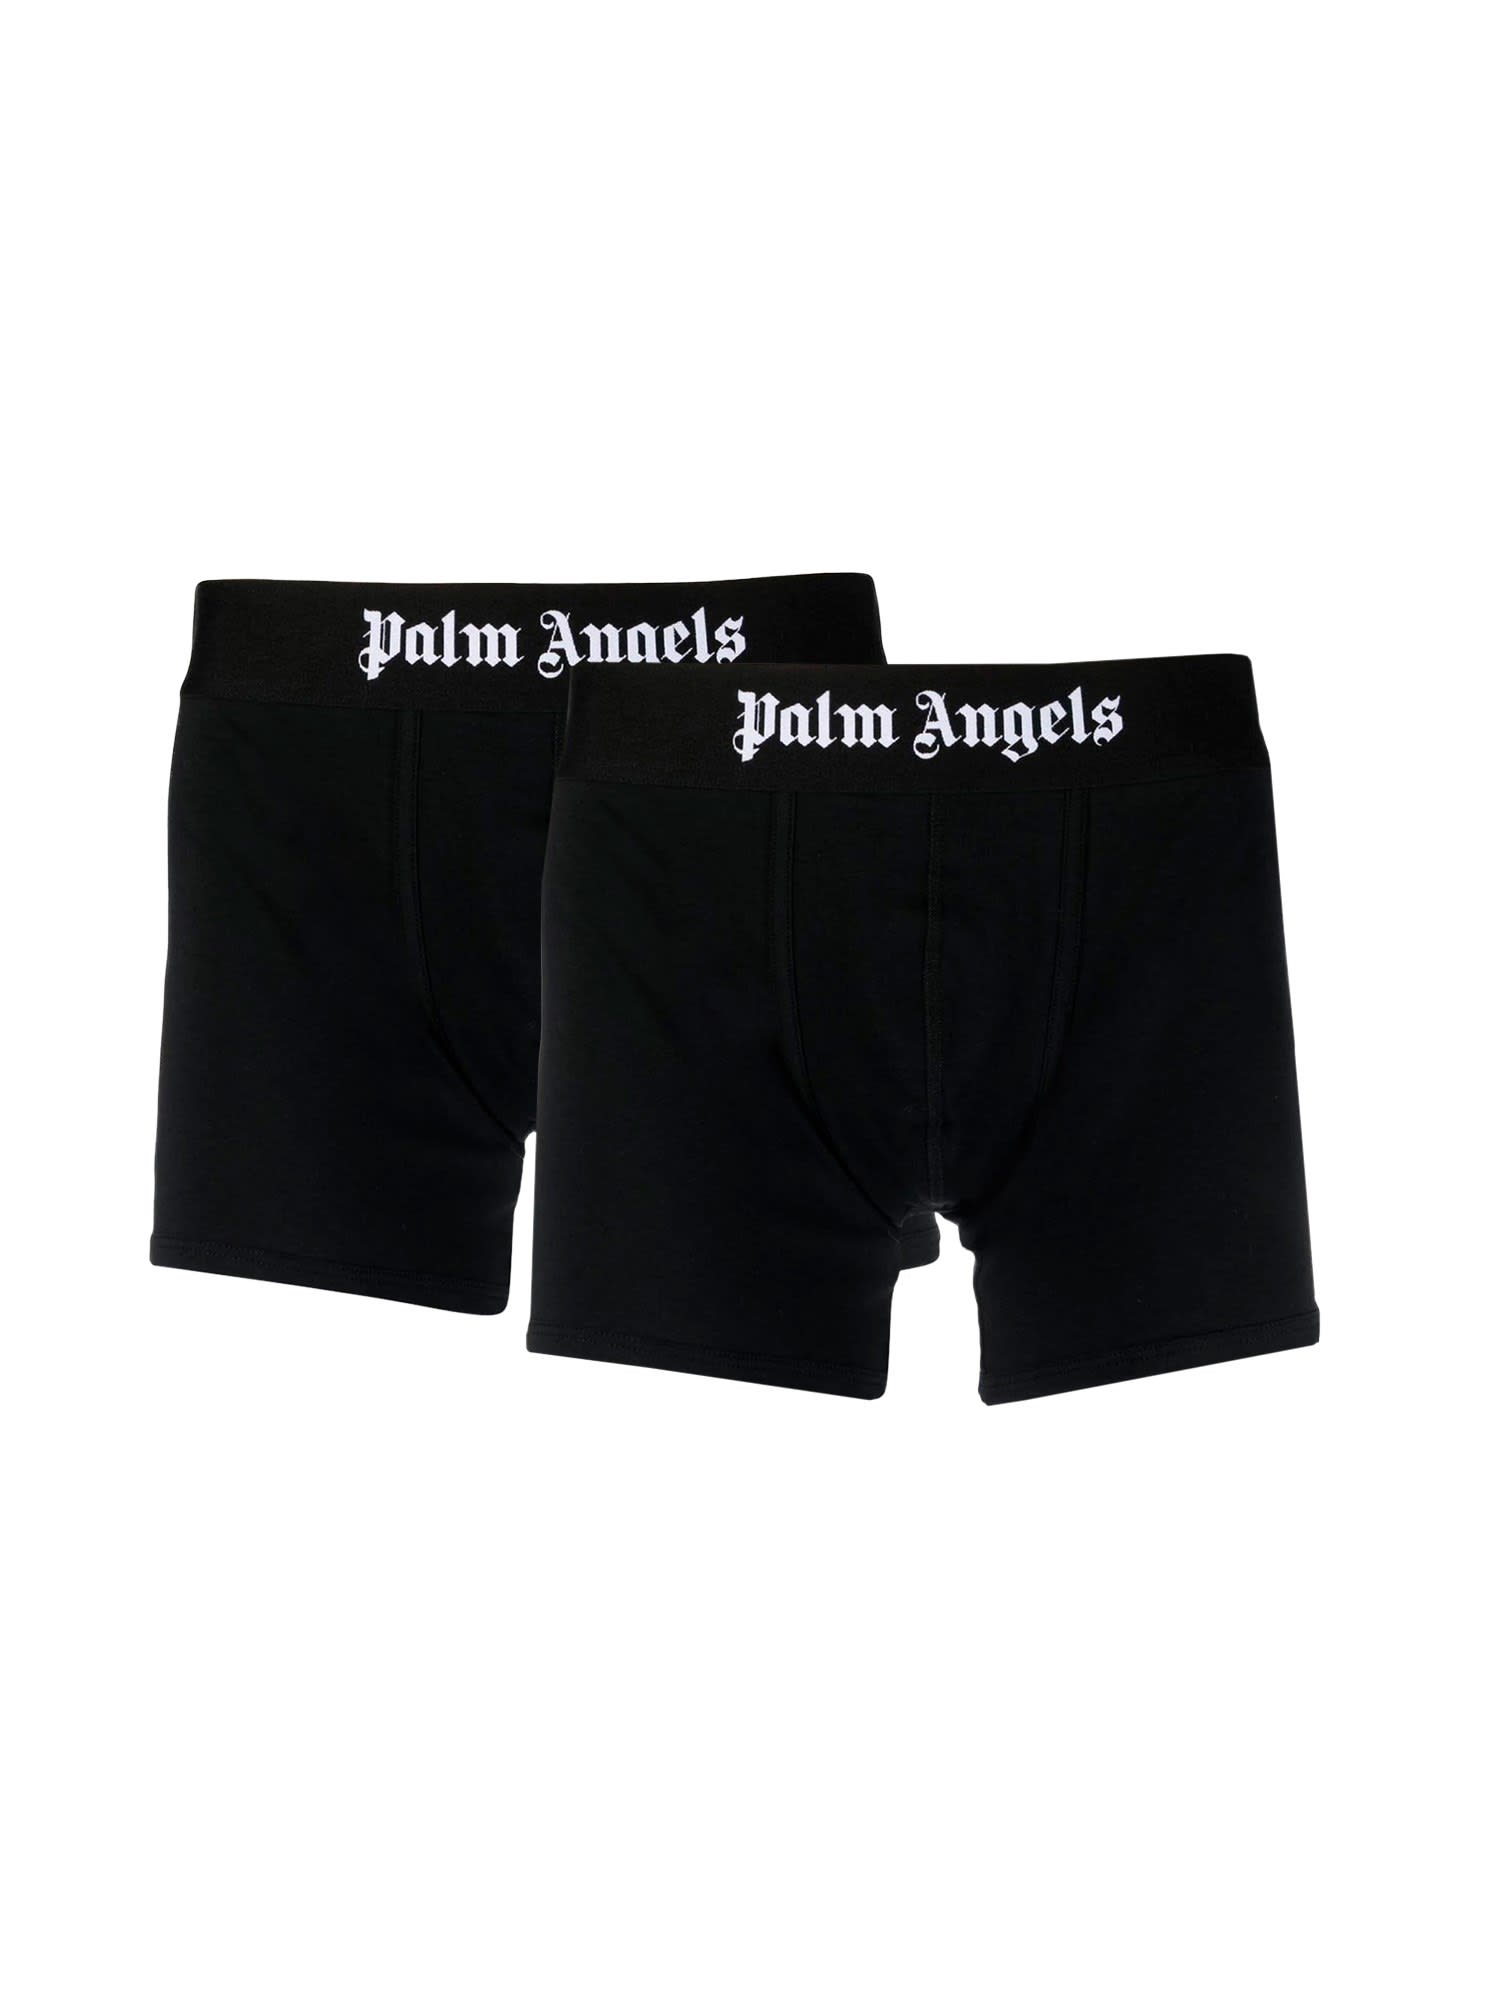 PALM ANGELS PACK OF TWO BOXERS